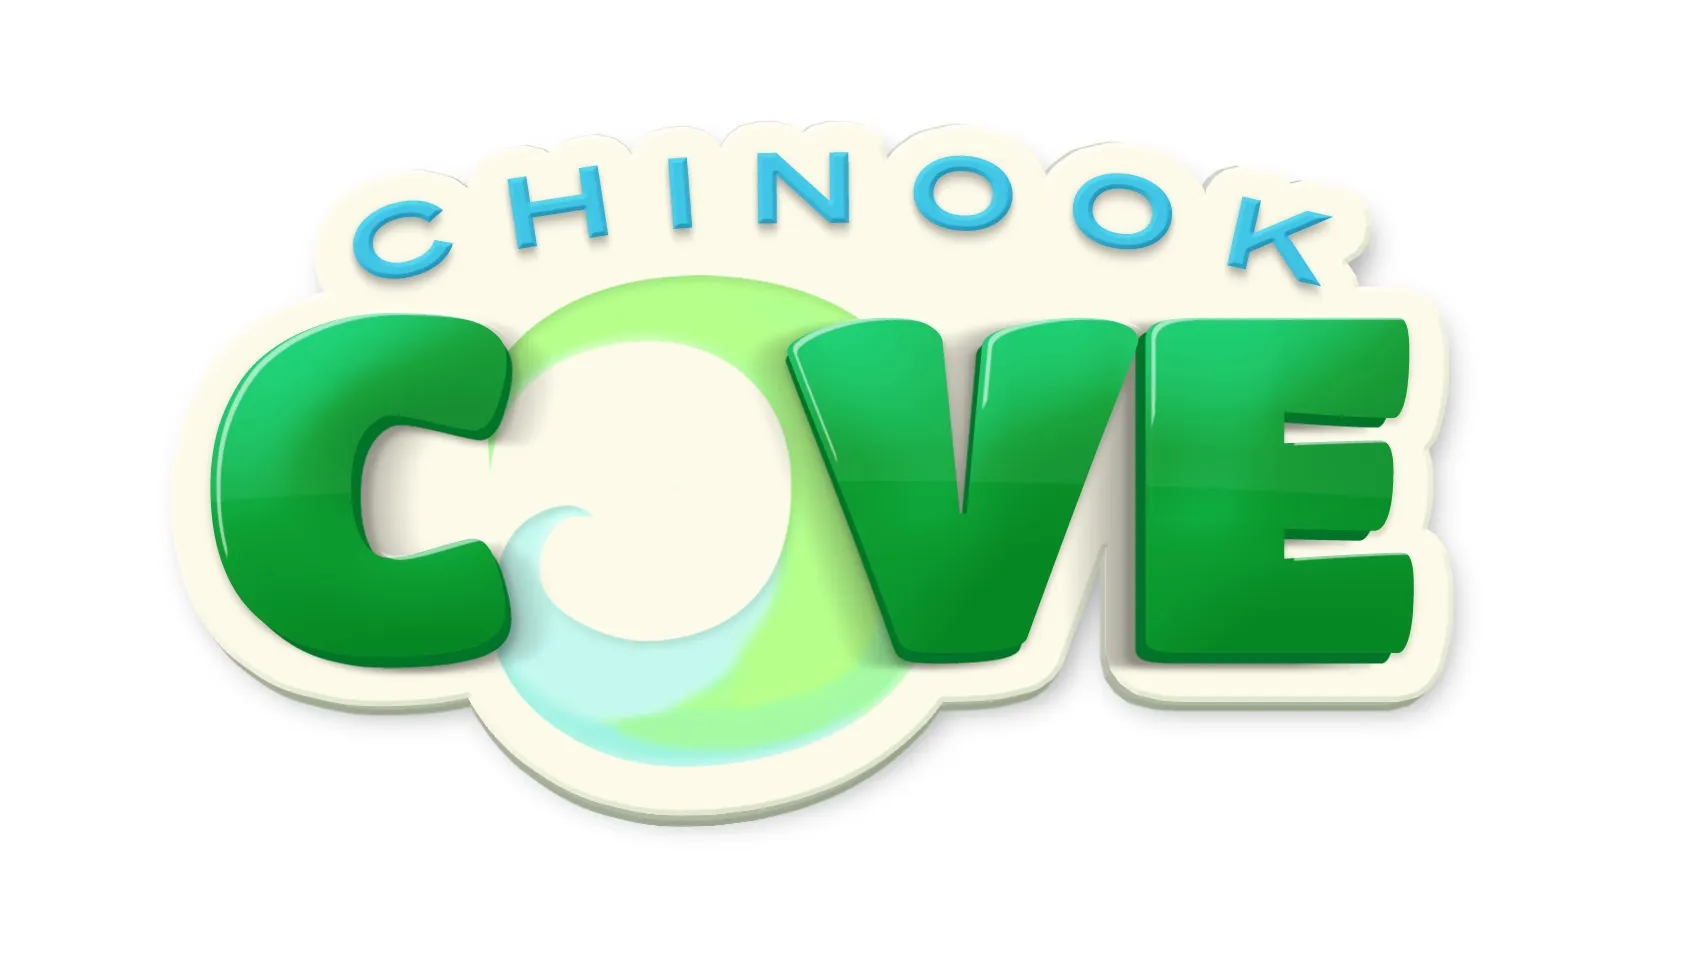 The logo for Chinook Cove